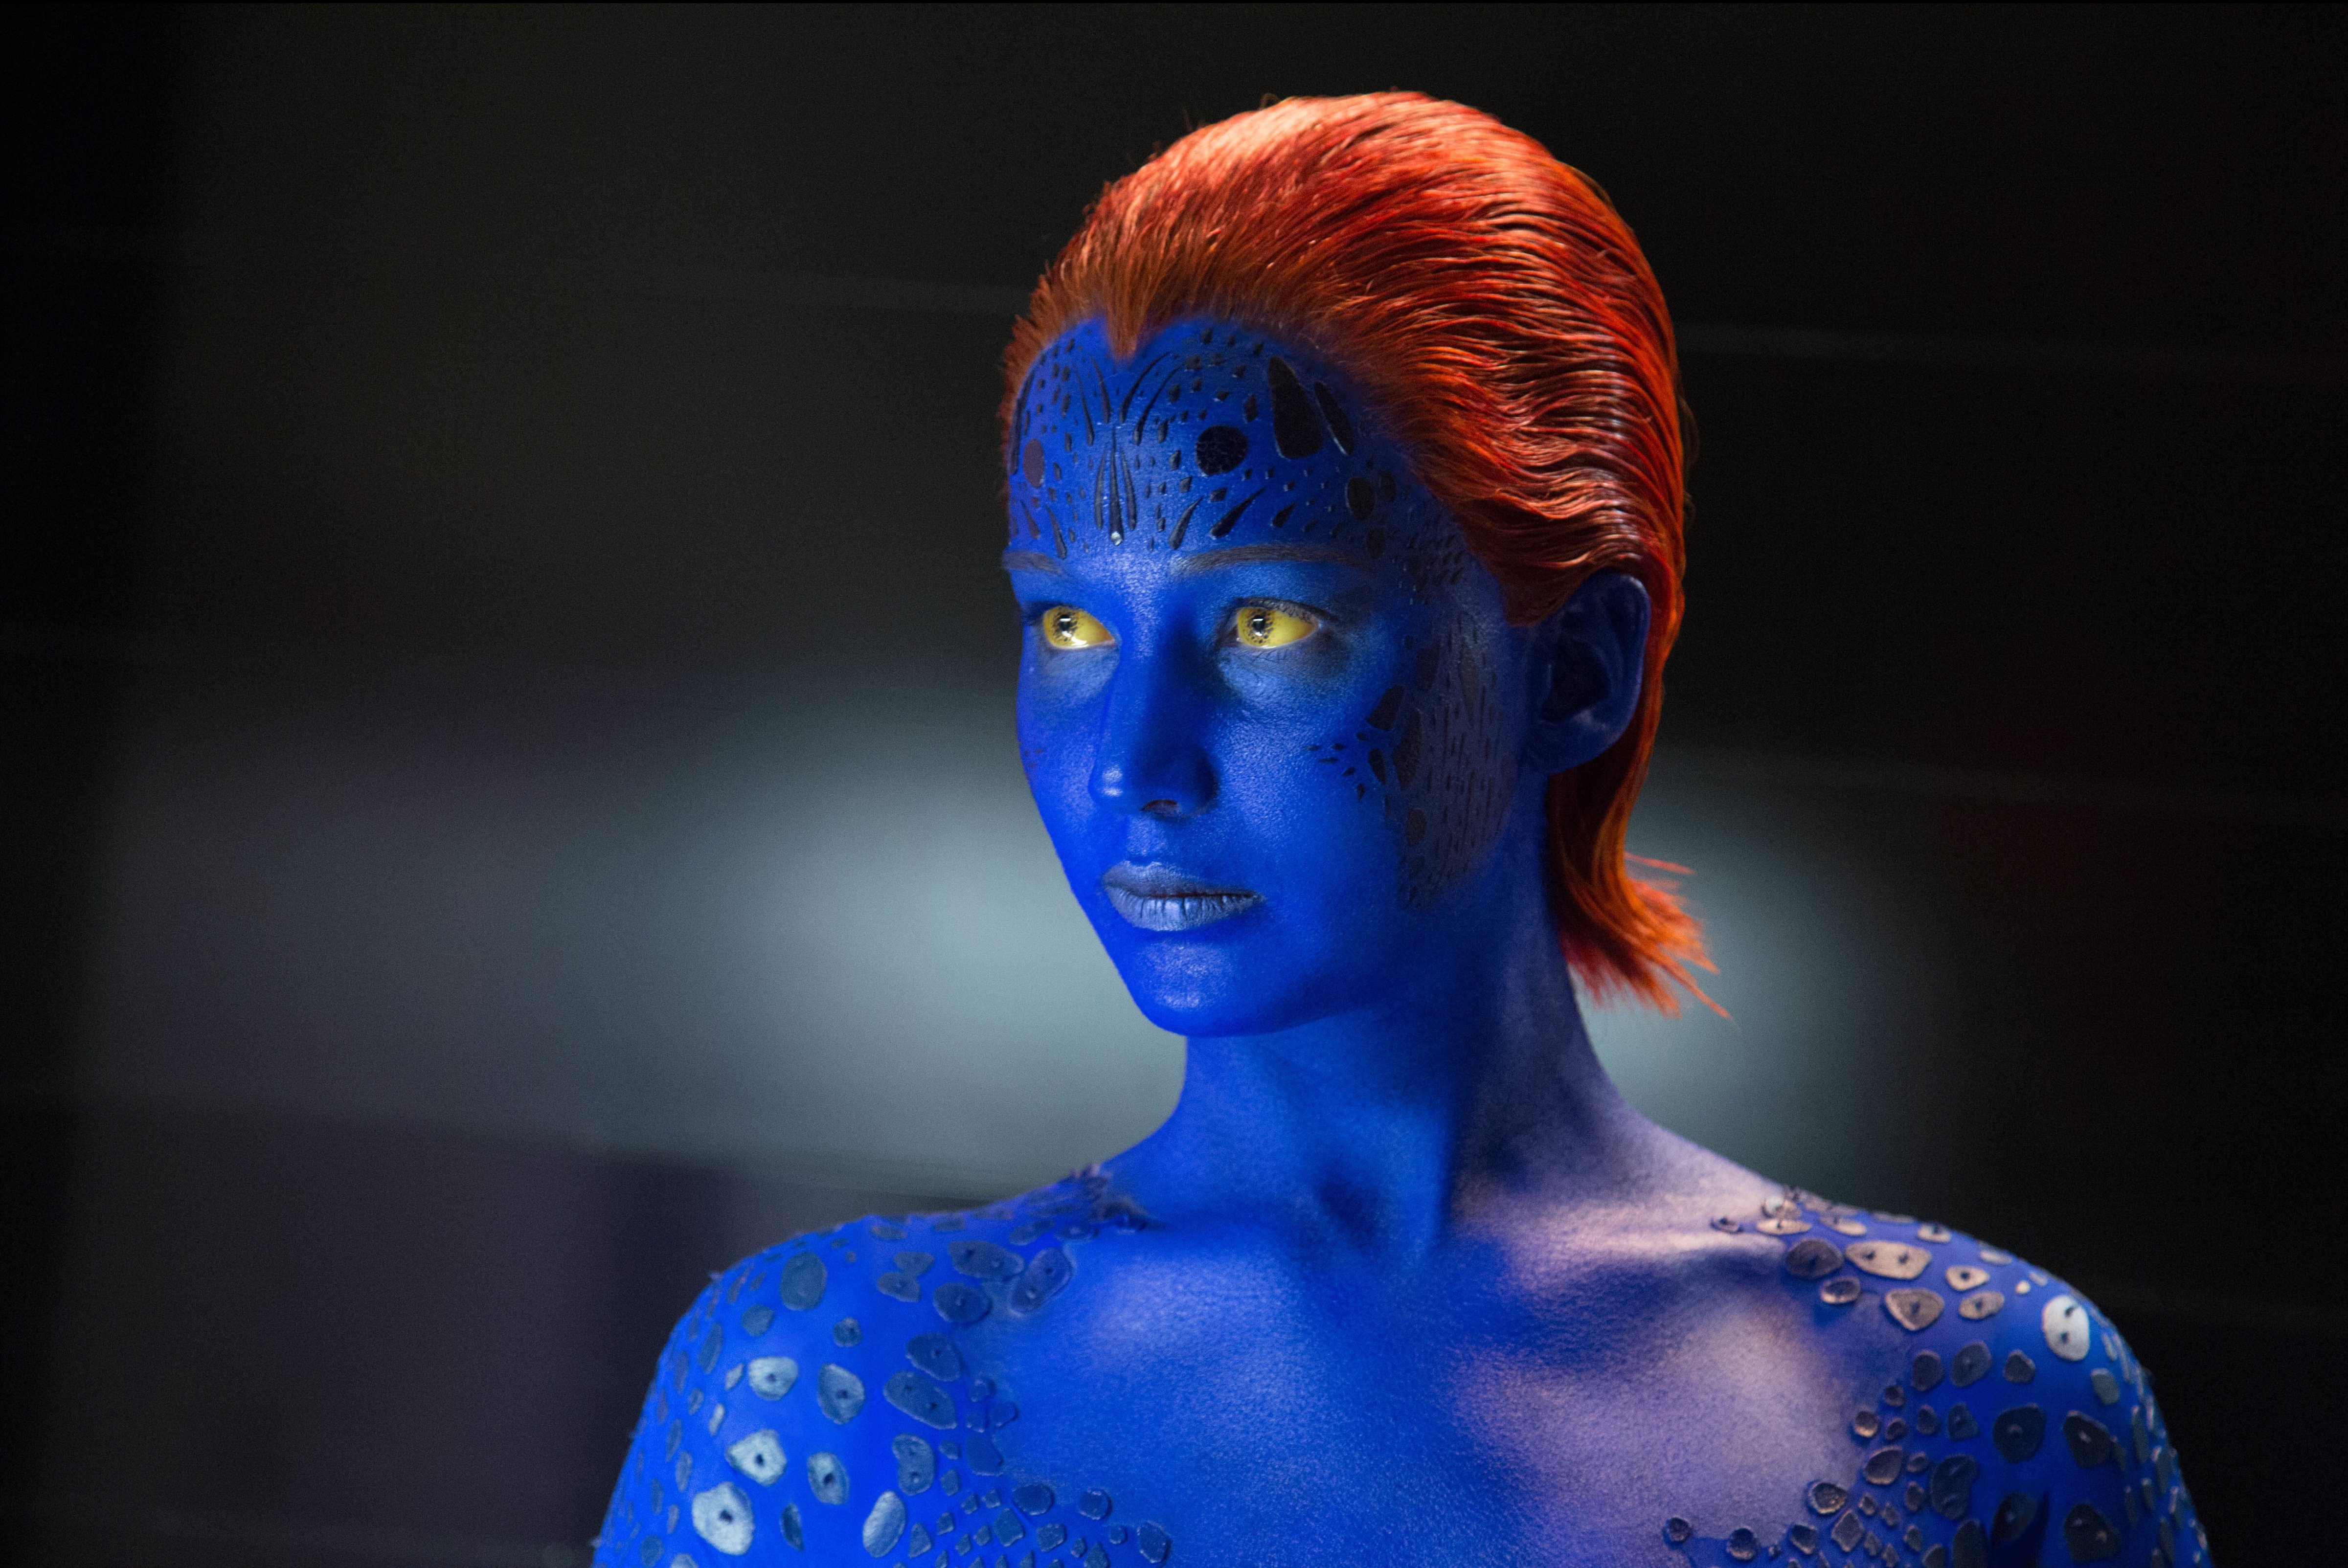 Jennifer Lawrence as Mystique in X-Men: Days of Future Past. (Alan Markfield—TM and © 2013 Marvel and Subs. TM and © 2013 Twentieth Century Fox Film Corporation)